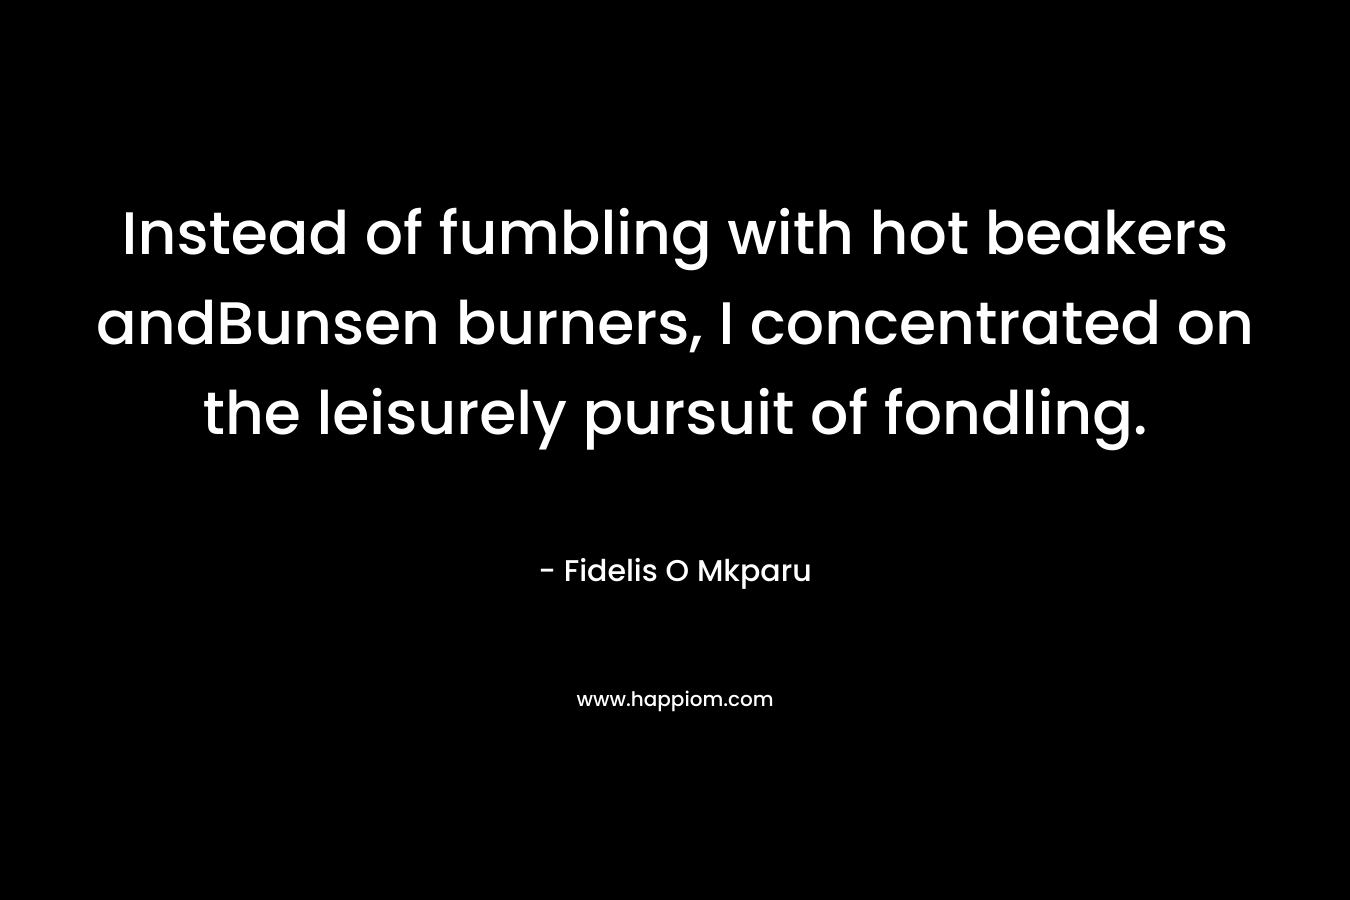 Instead of fumbling with hot beakers andBunsen burners, I concentrated on the leisurely pursuit of fondling. – Fidelis O Mkparu